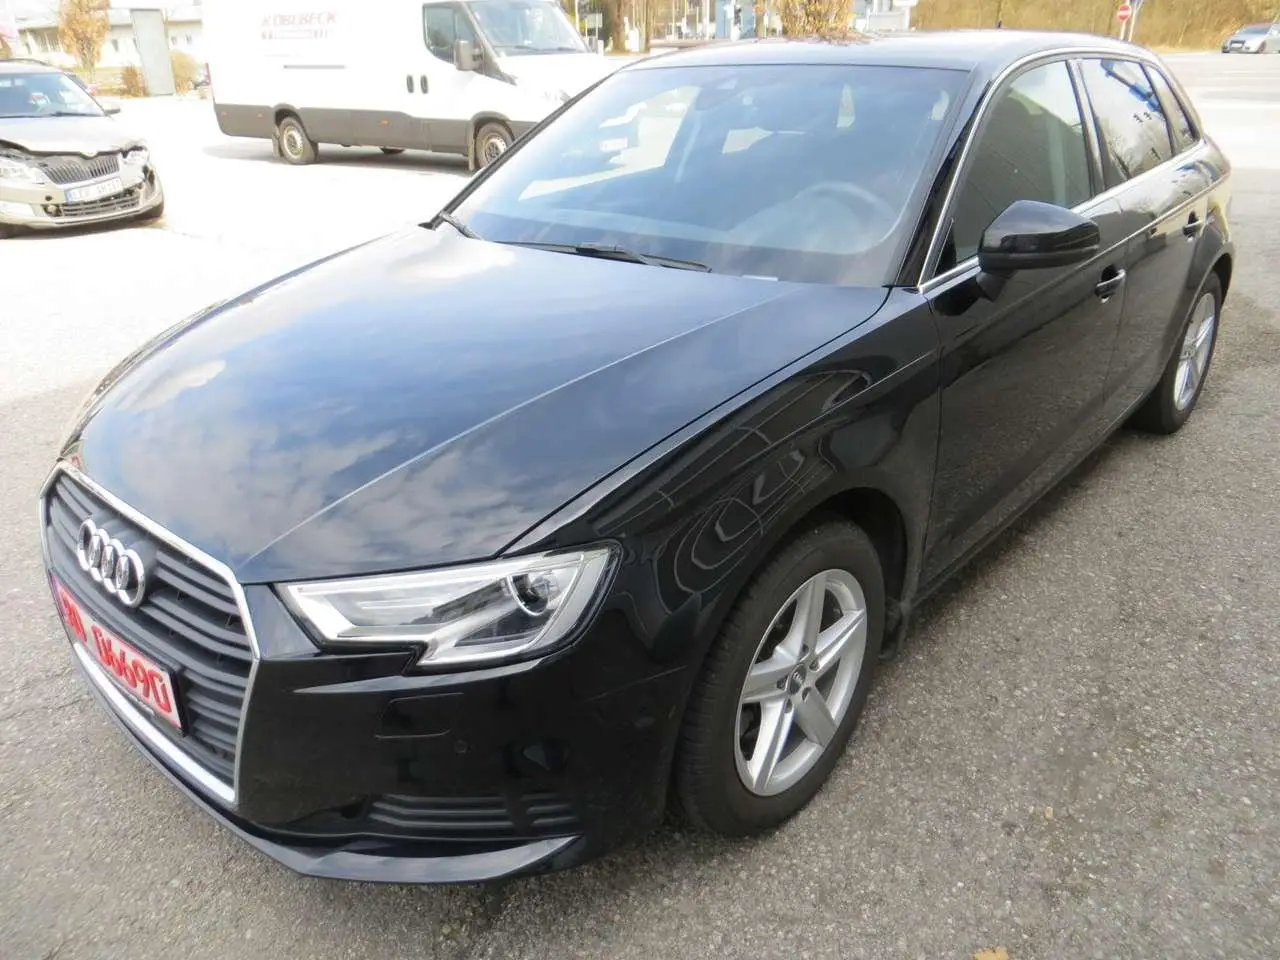 Photo 1 : Audi A3 2020 Others